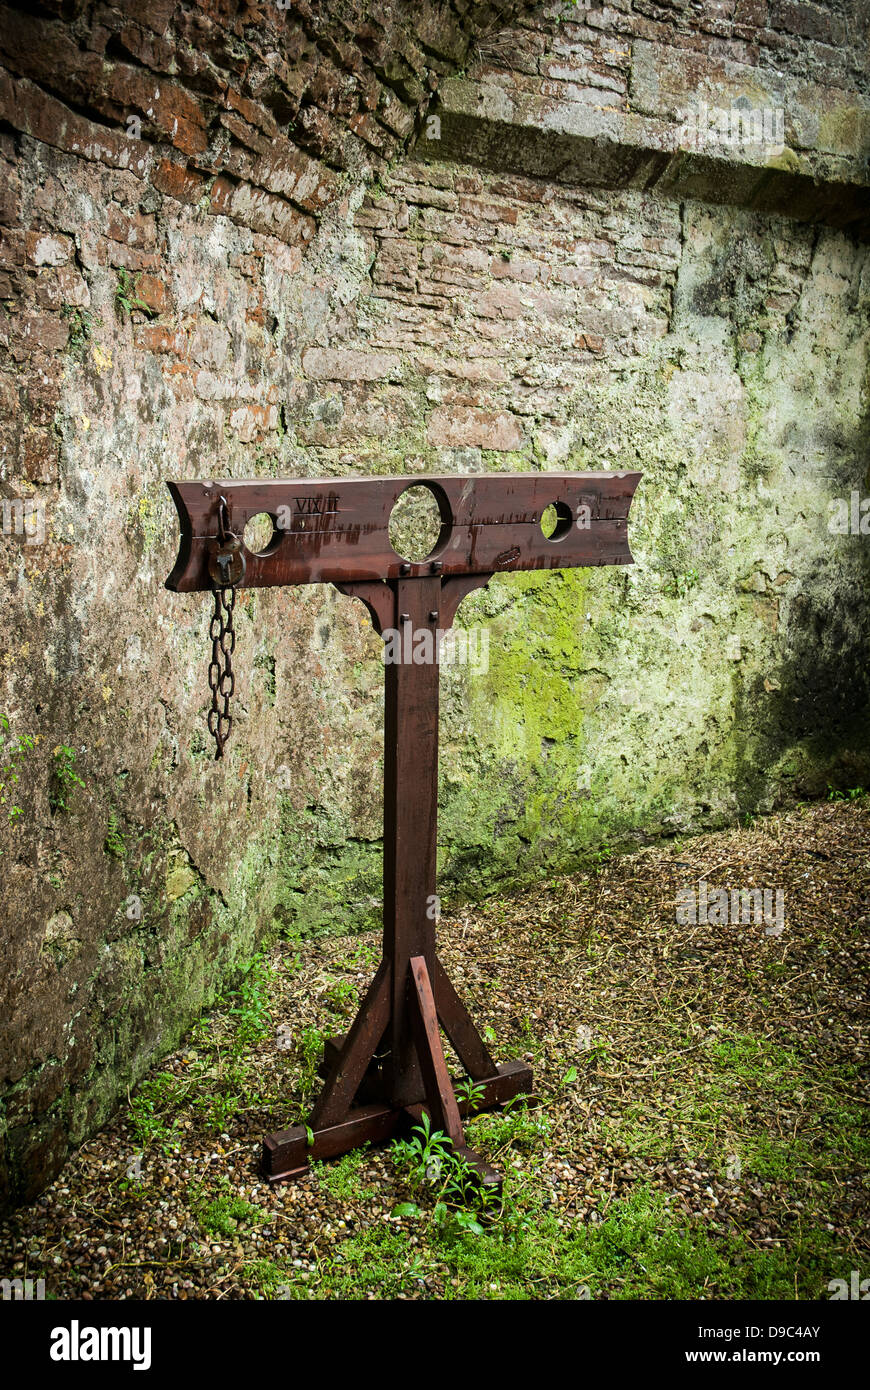 Detail of wooden medieval stocks used to incarcerate criminals in castle grounds. Stock Photo